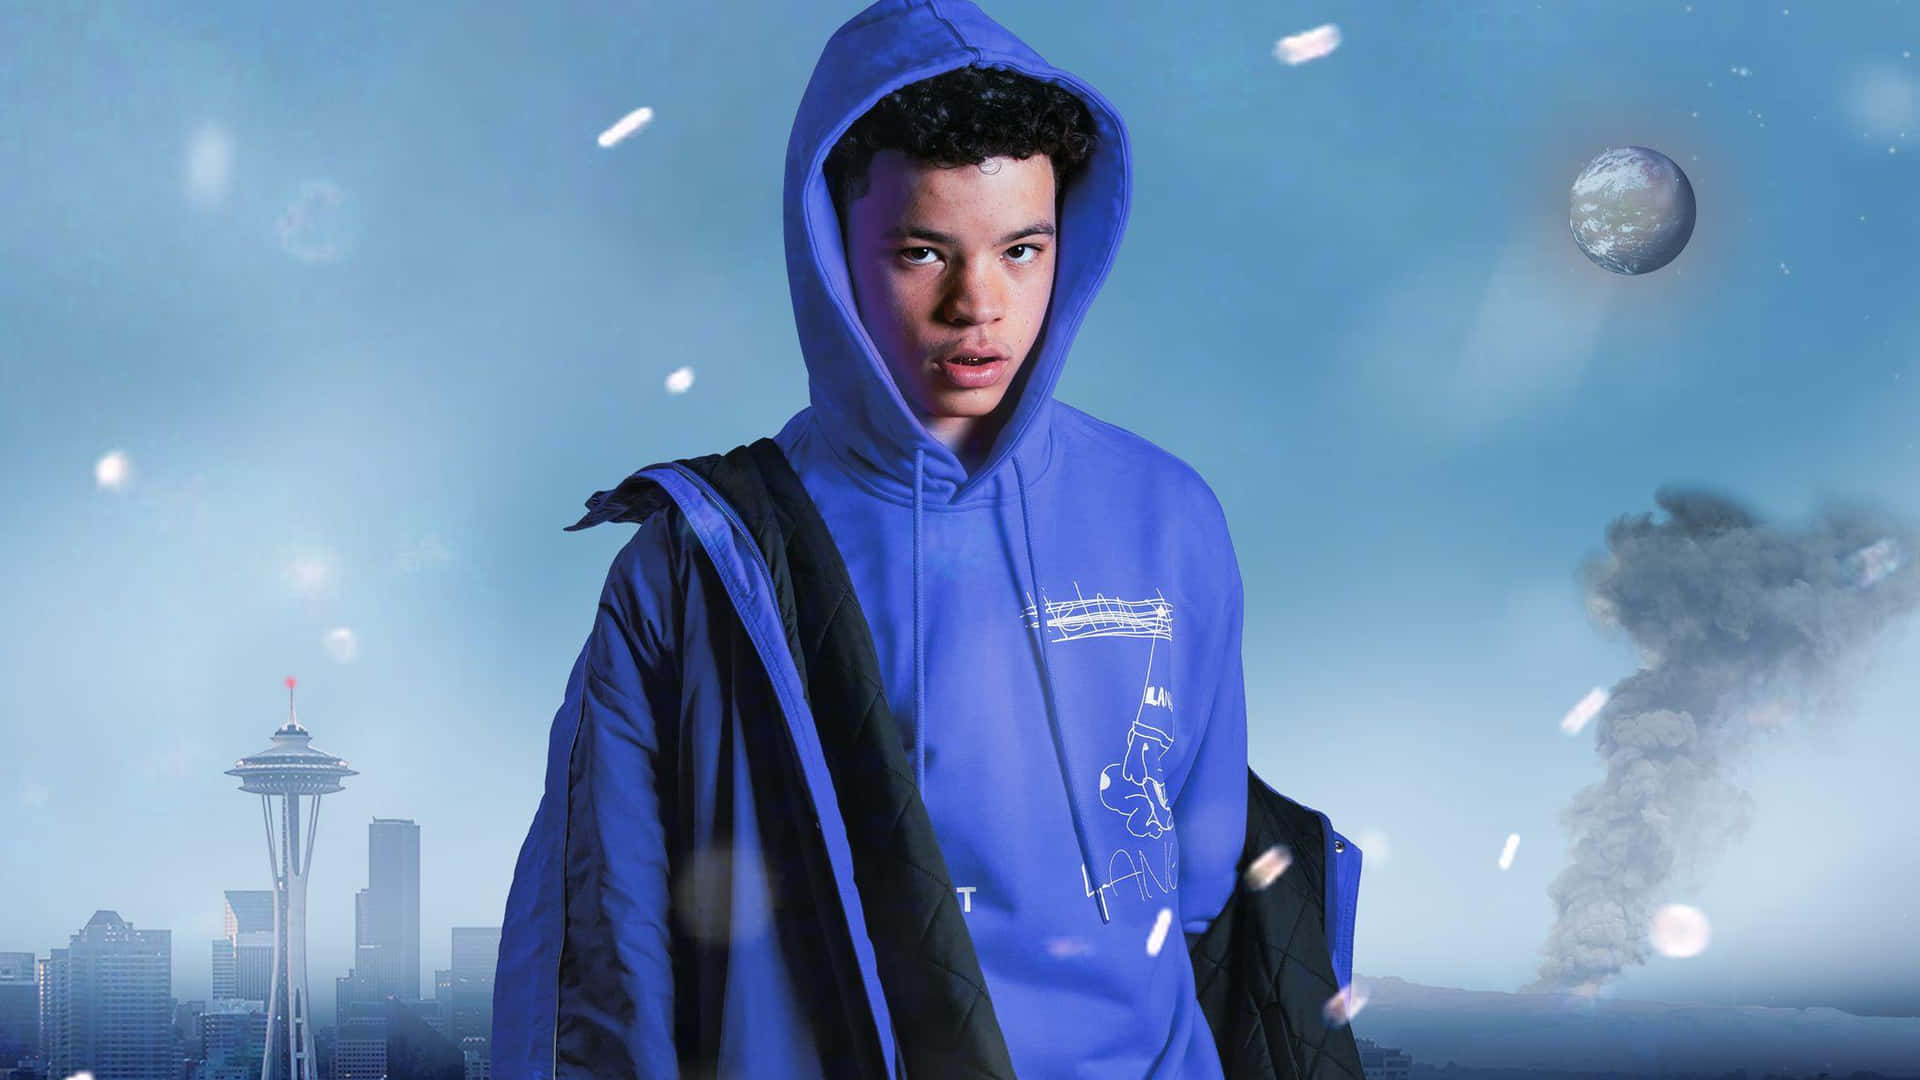 Lil Mosey Wallpaper  Mosey Celebrity wallpapers Rapper wallpaper iphone